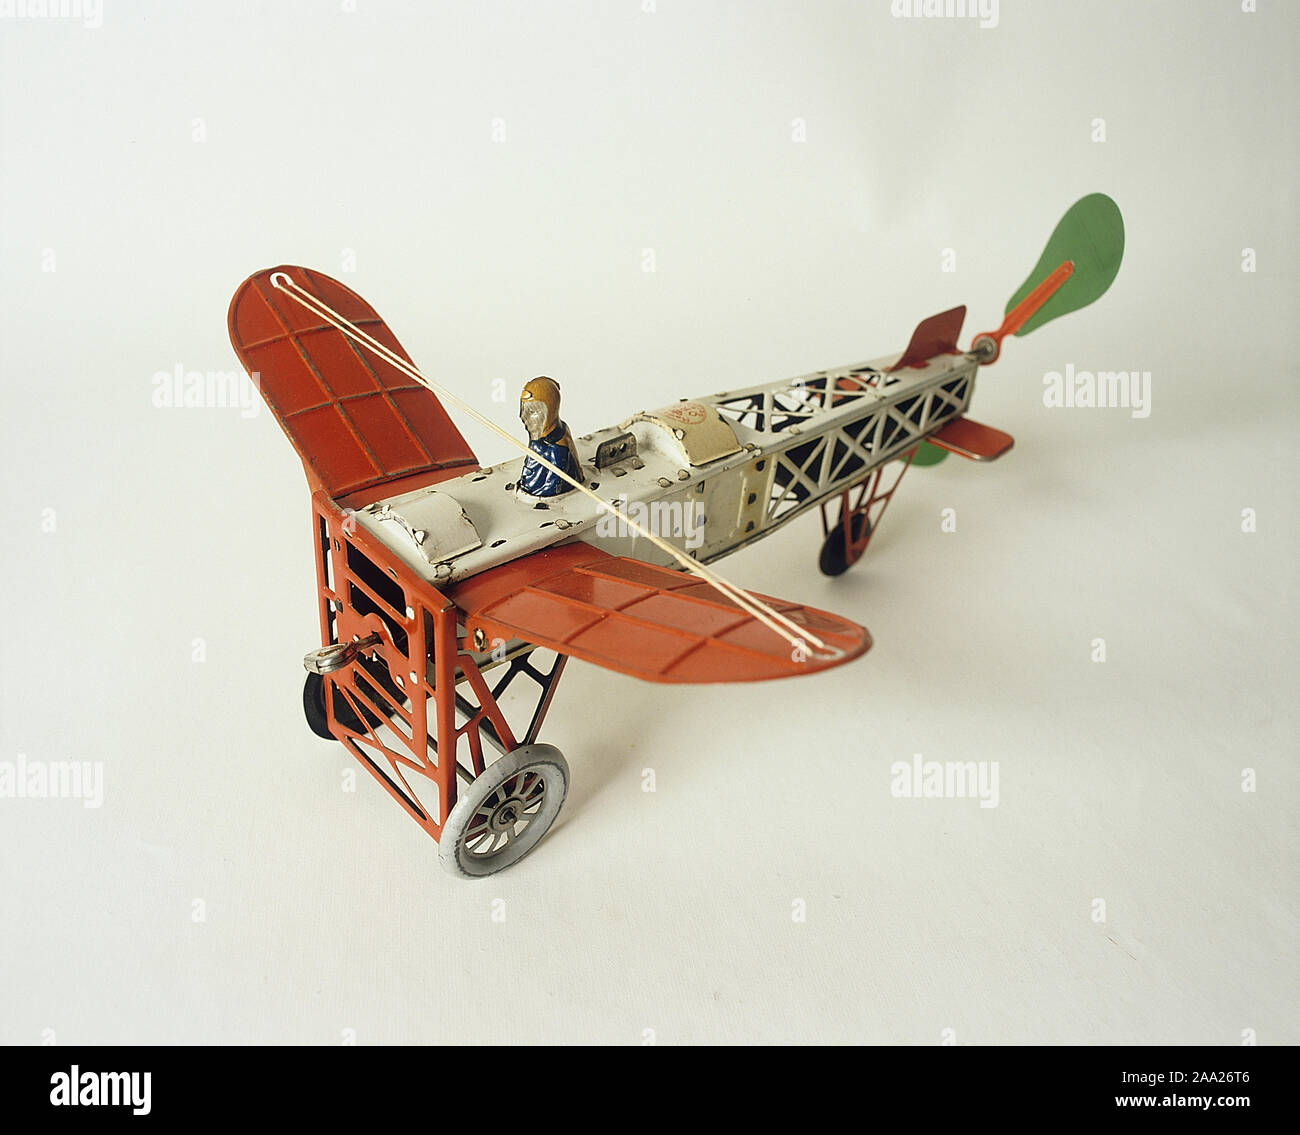 Childrens toys from the past. Tin toy airplane that was popular around the turn of the century 1800-1900. Simple but fun toys that were cheap to buy. They are now collectible and can be very valuable. German toy manufacturers dominated the production of early toys. Stock Photo